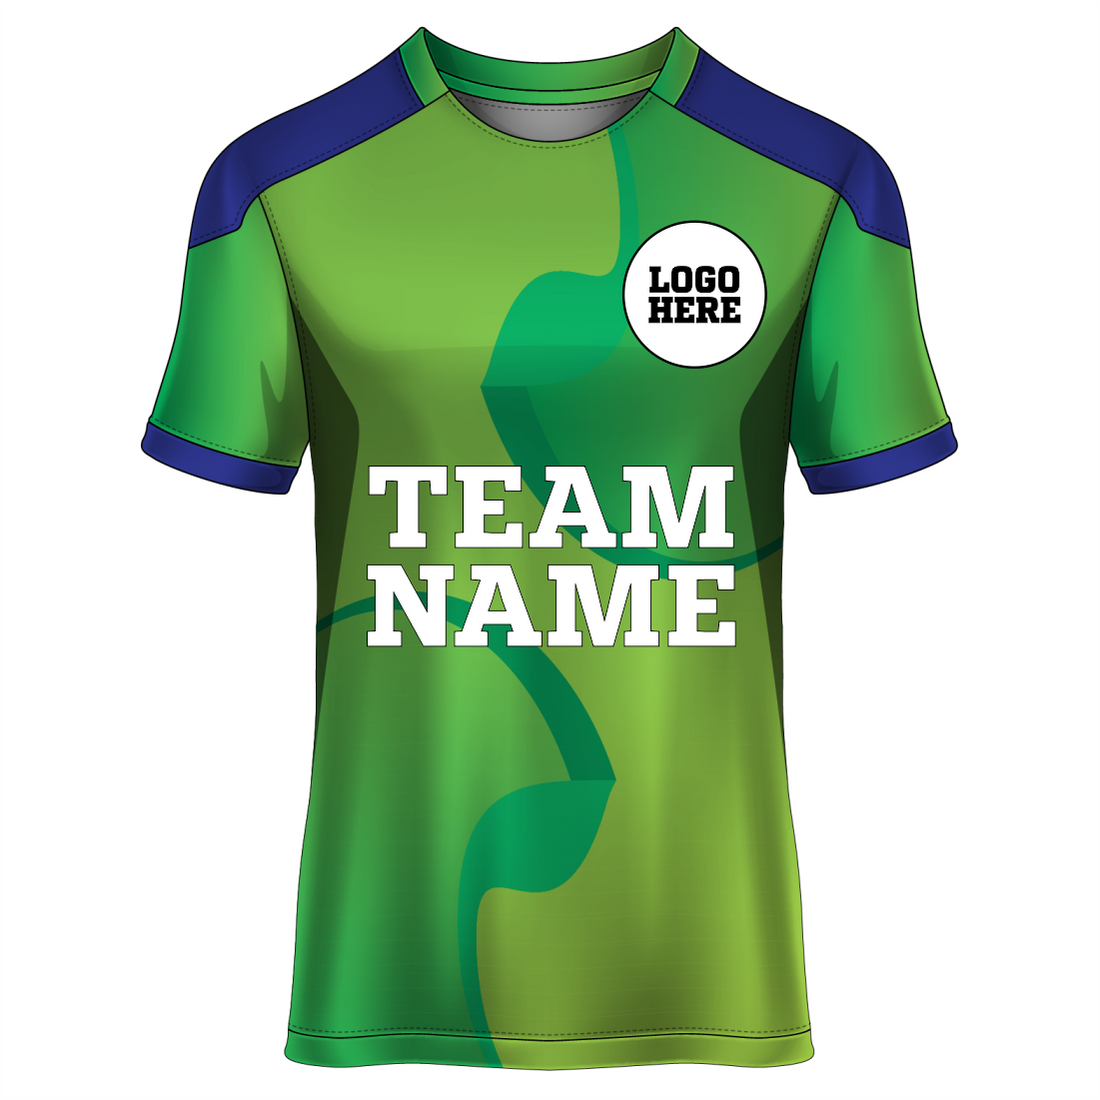 NEXT PRINT All Over Printed Customized Sublimation T-Shirt Unisex Sports Jersey Player Name & Number, Team Name And Logo. 1925833316